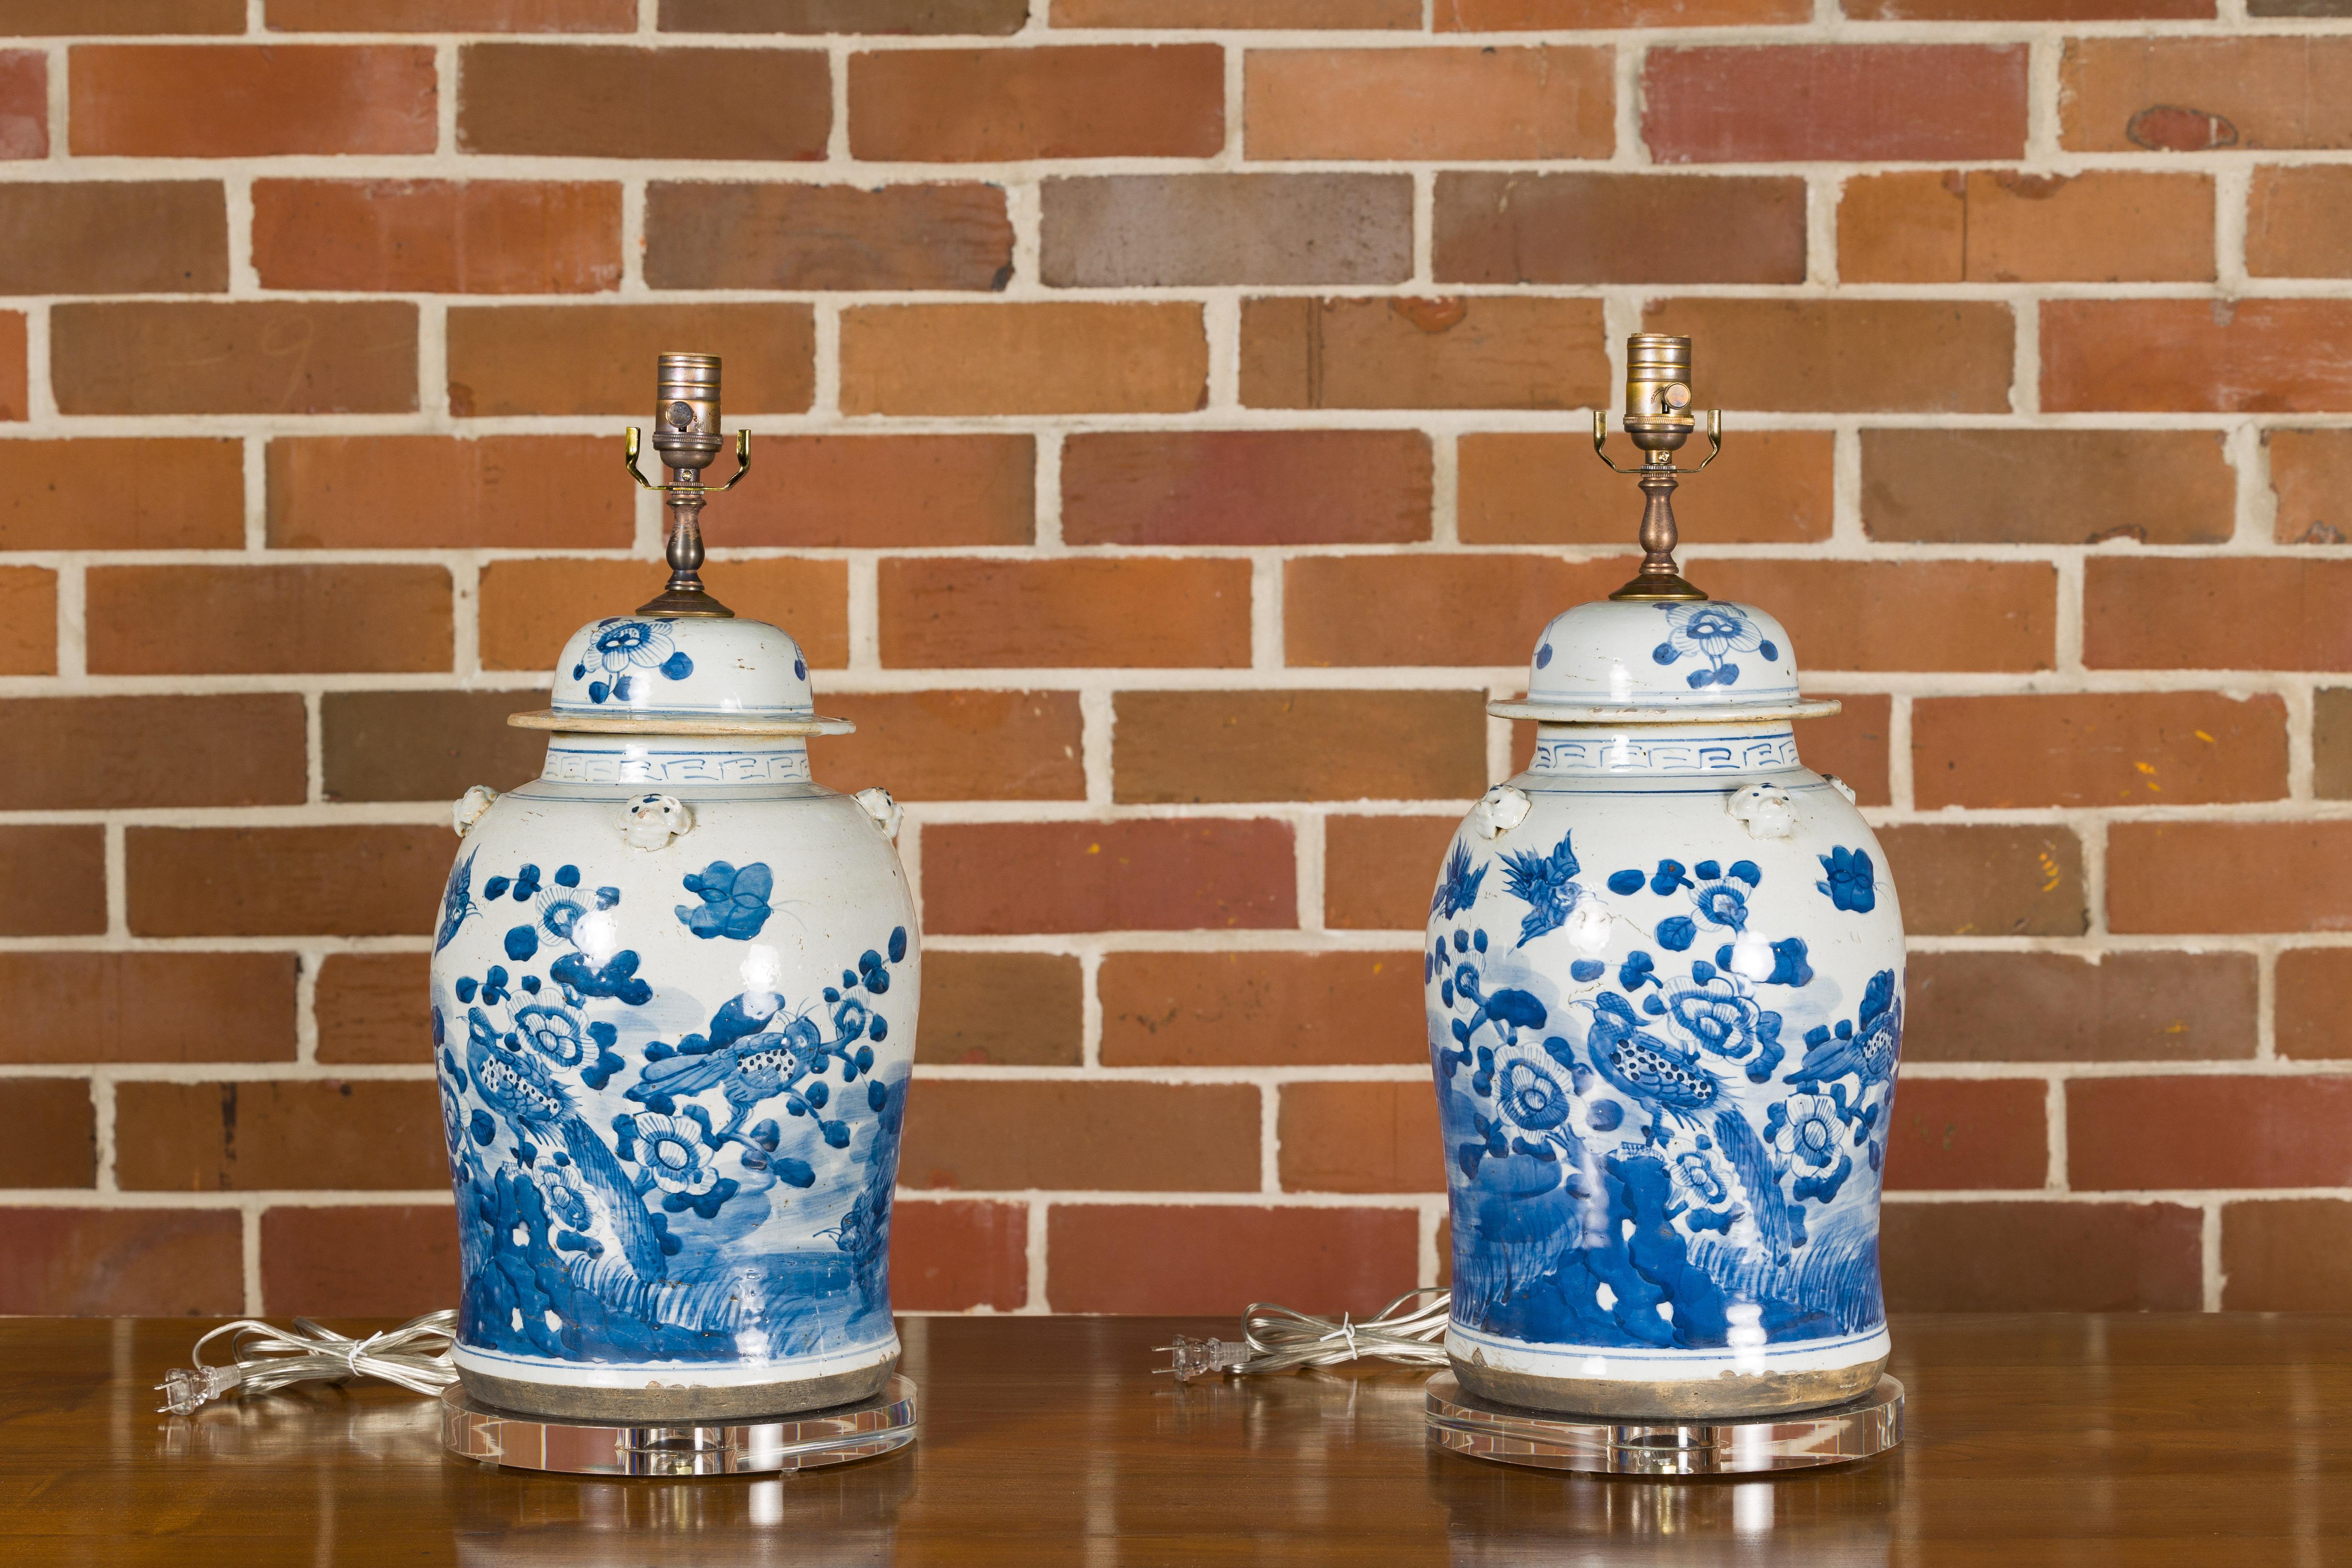 A pair of Asian porcelain jars with blue and white floral and bird décor, newly mounted as table lamps on lucite bases. This pair of Asian porcelain jars has been thoughtfully repurposed into stunning modern table lamps, fusing timeless elegance